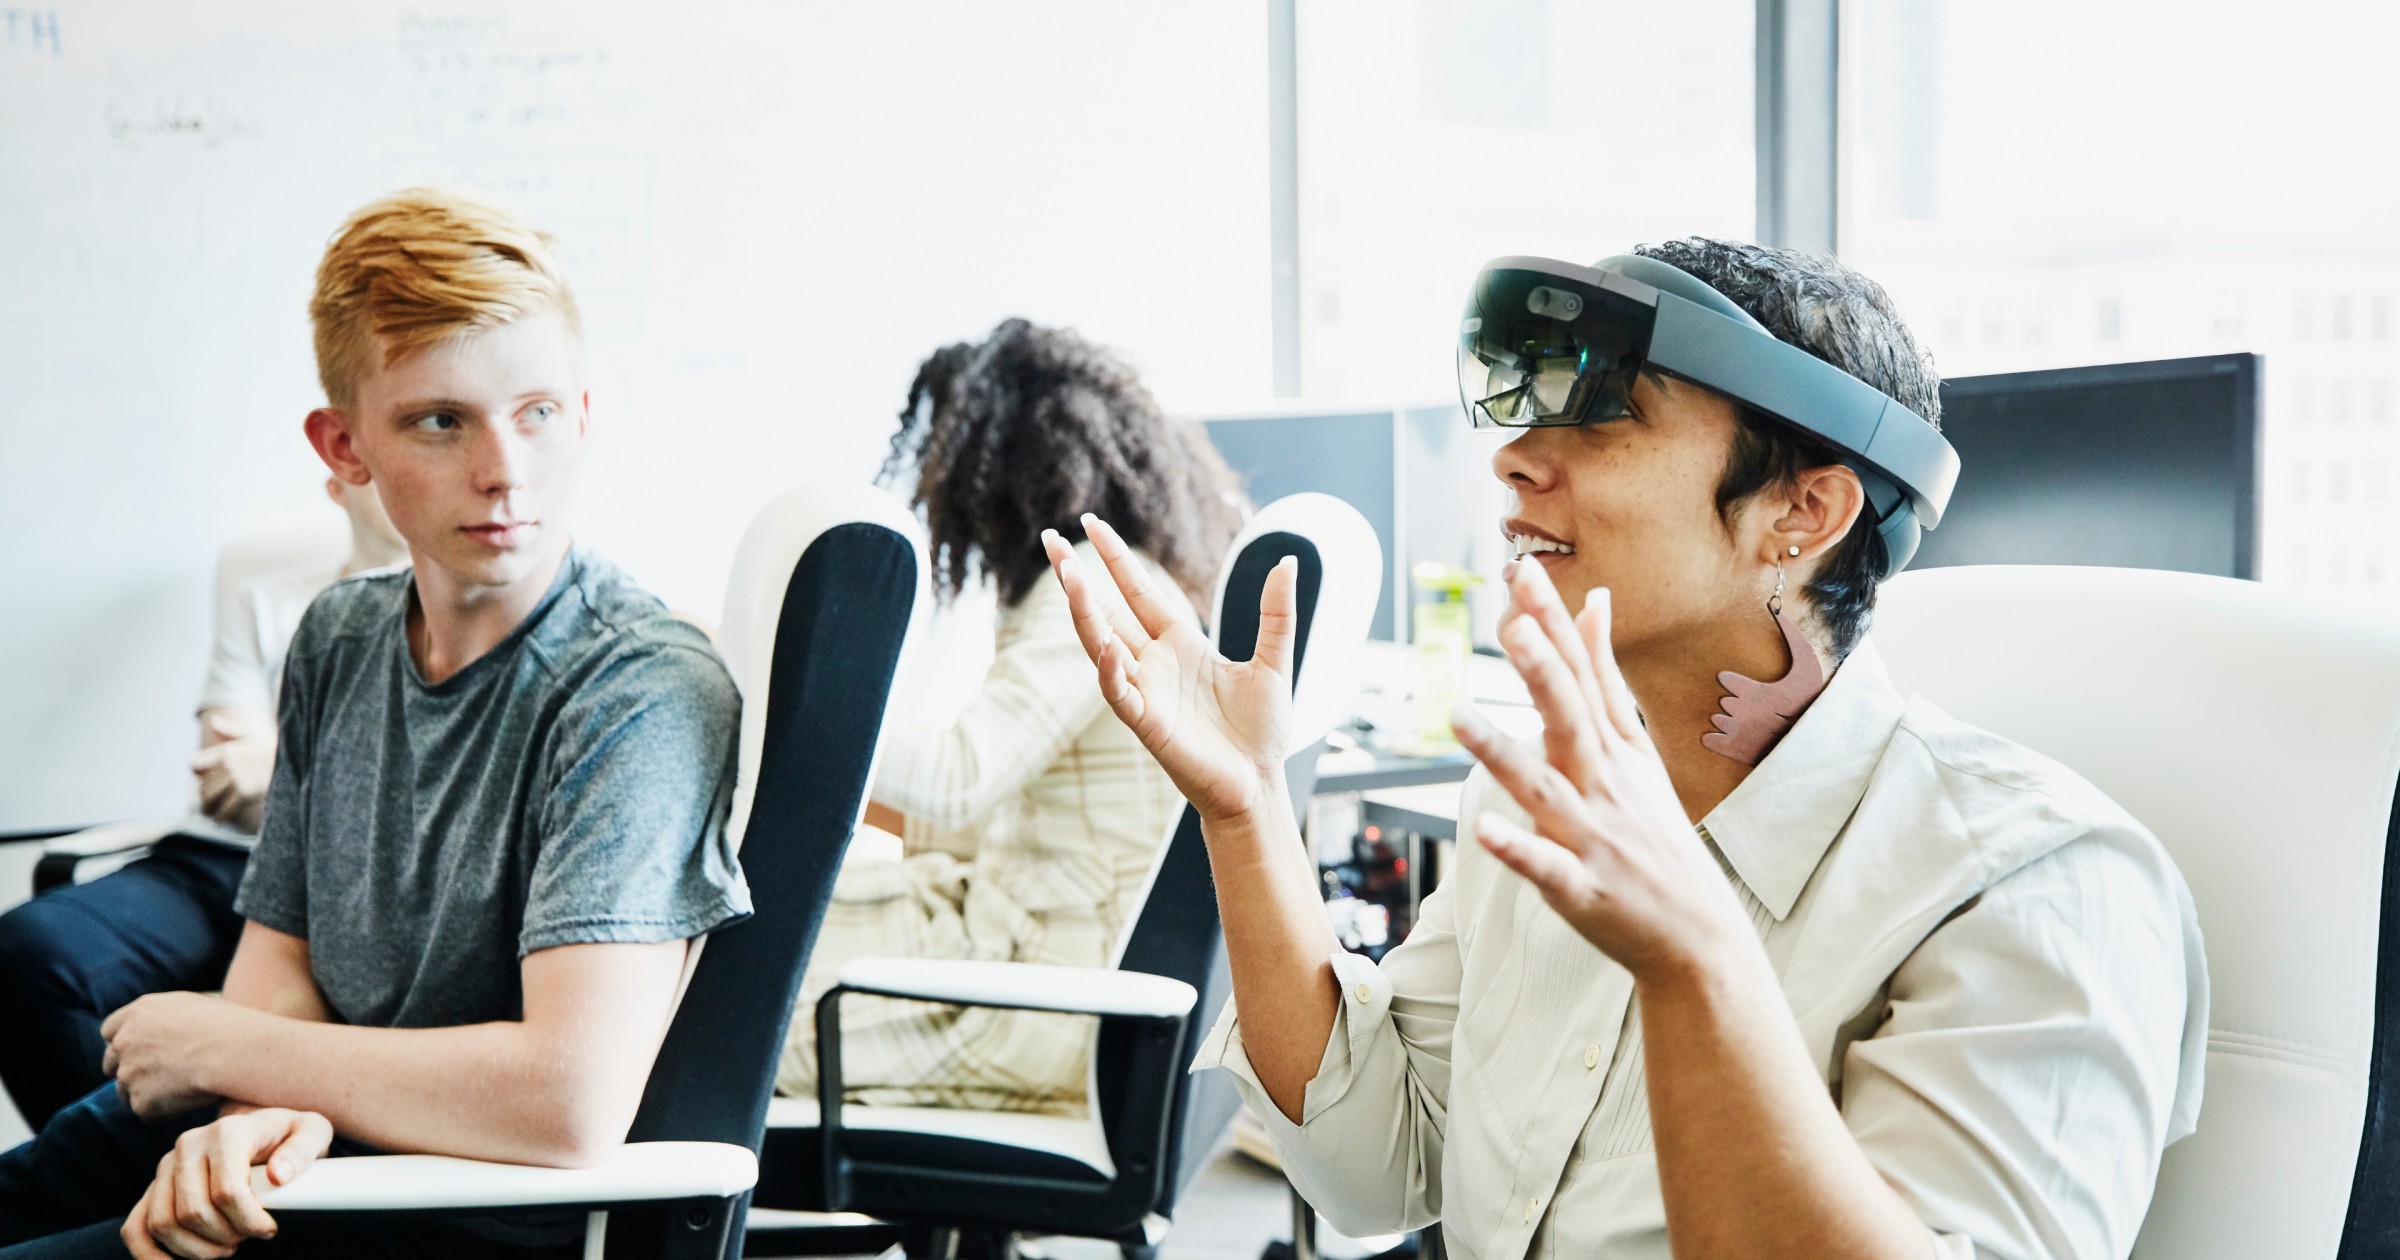 Female engineer in discussion with coworker while testing program on augmented reality headset in computer lab